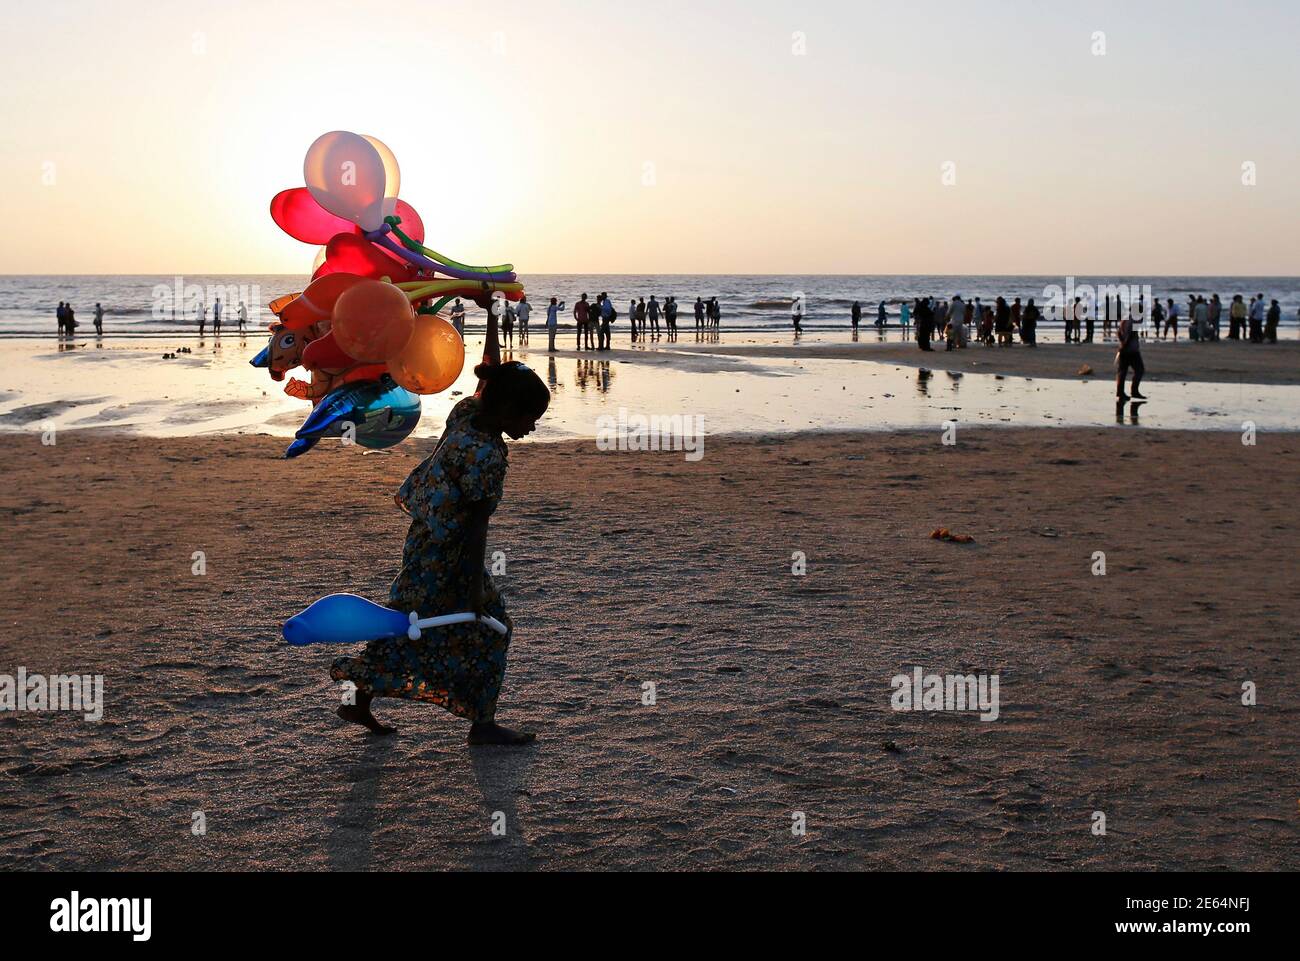 Meera, 9, is silhouetted against the setting sun while selling balloons along the shores of the Arabian Sea in Mumbai February 11, 2014. REUTERS/Danish Siddiqui (INDIA - Tags: SOCIETY) Stock Photo